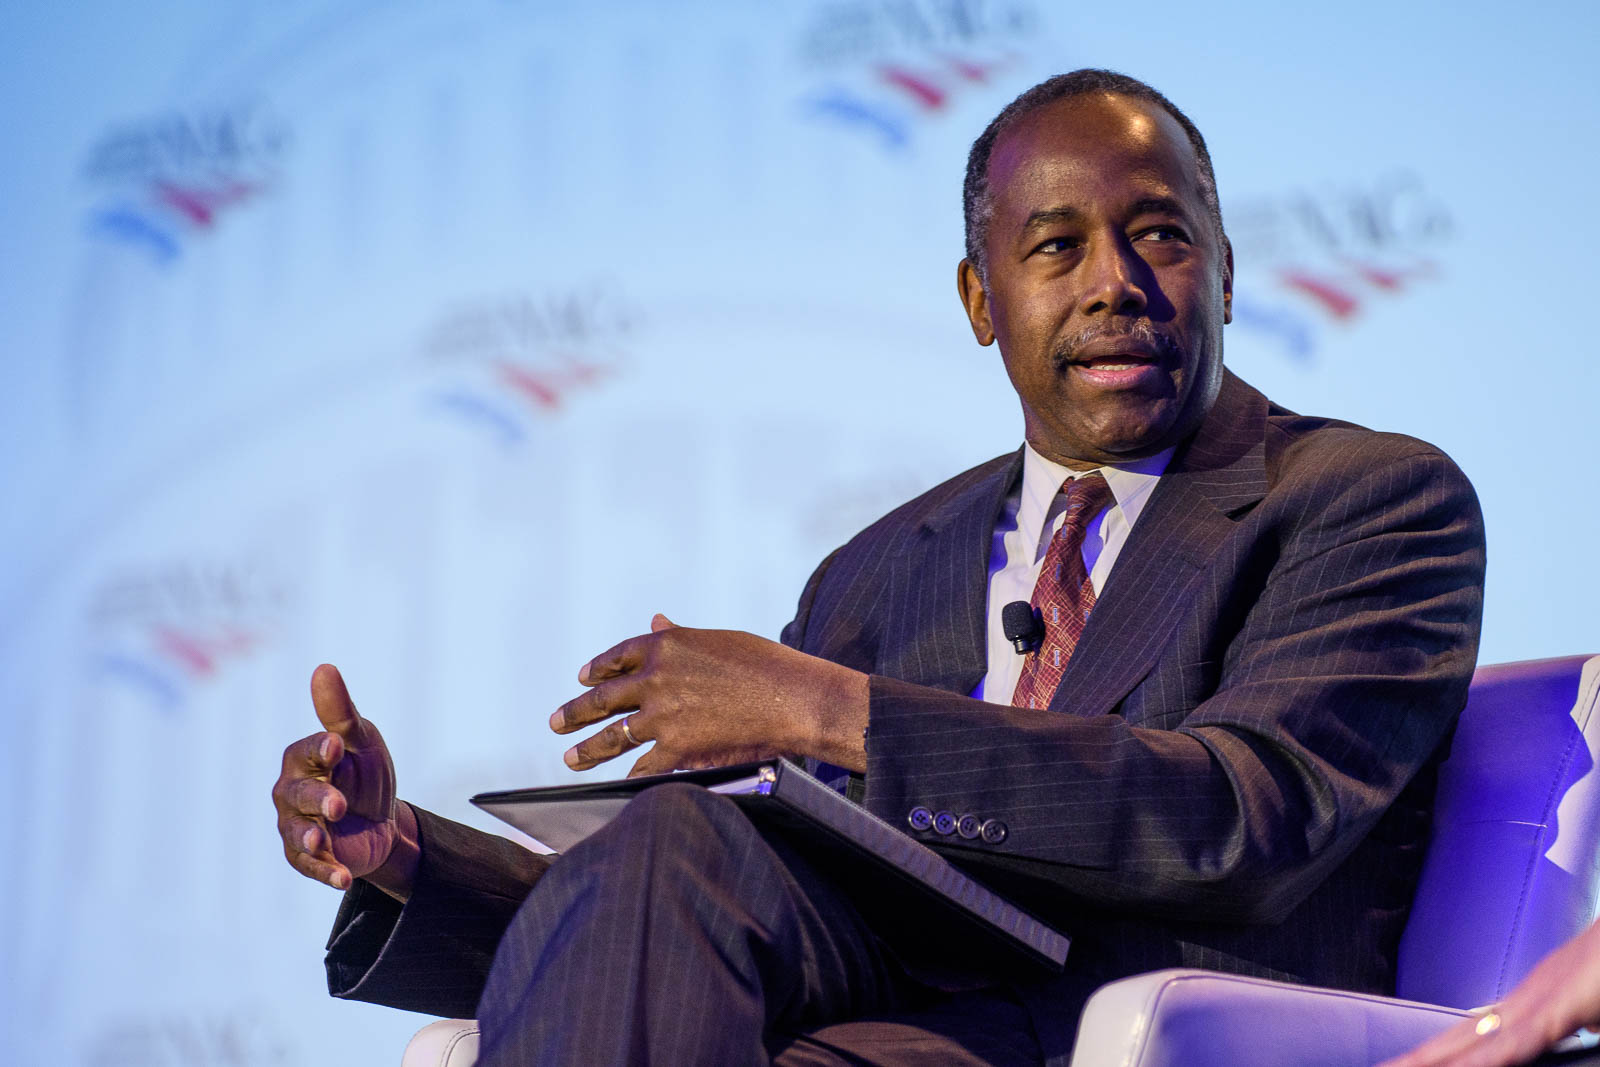 Secretary Carson discusses the benefits of Opportunity Zones